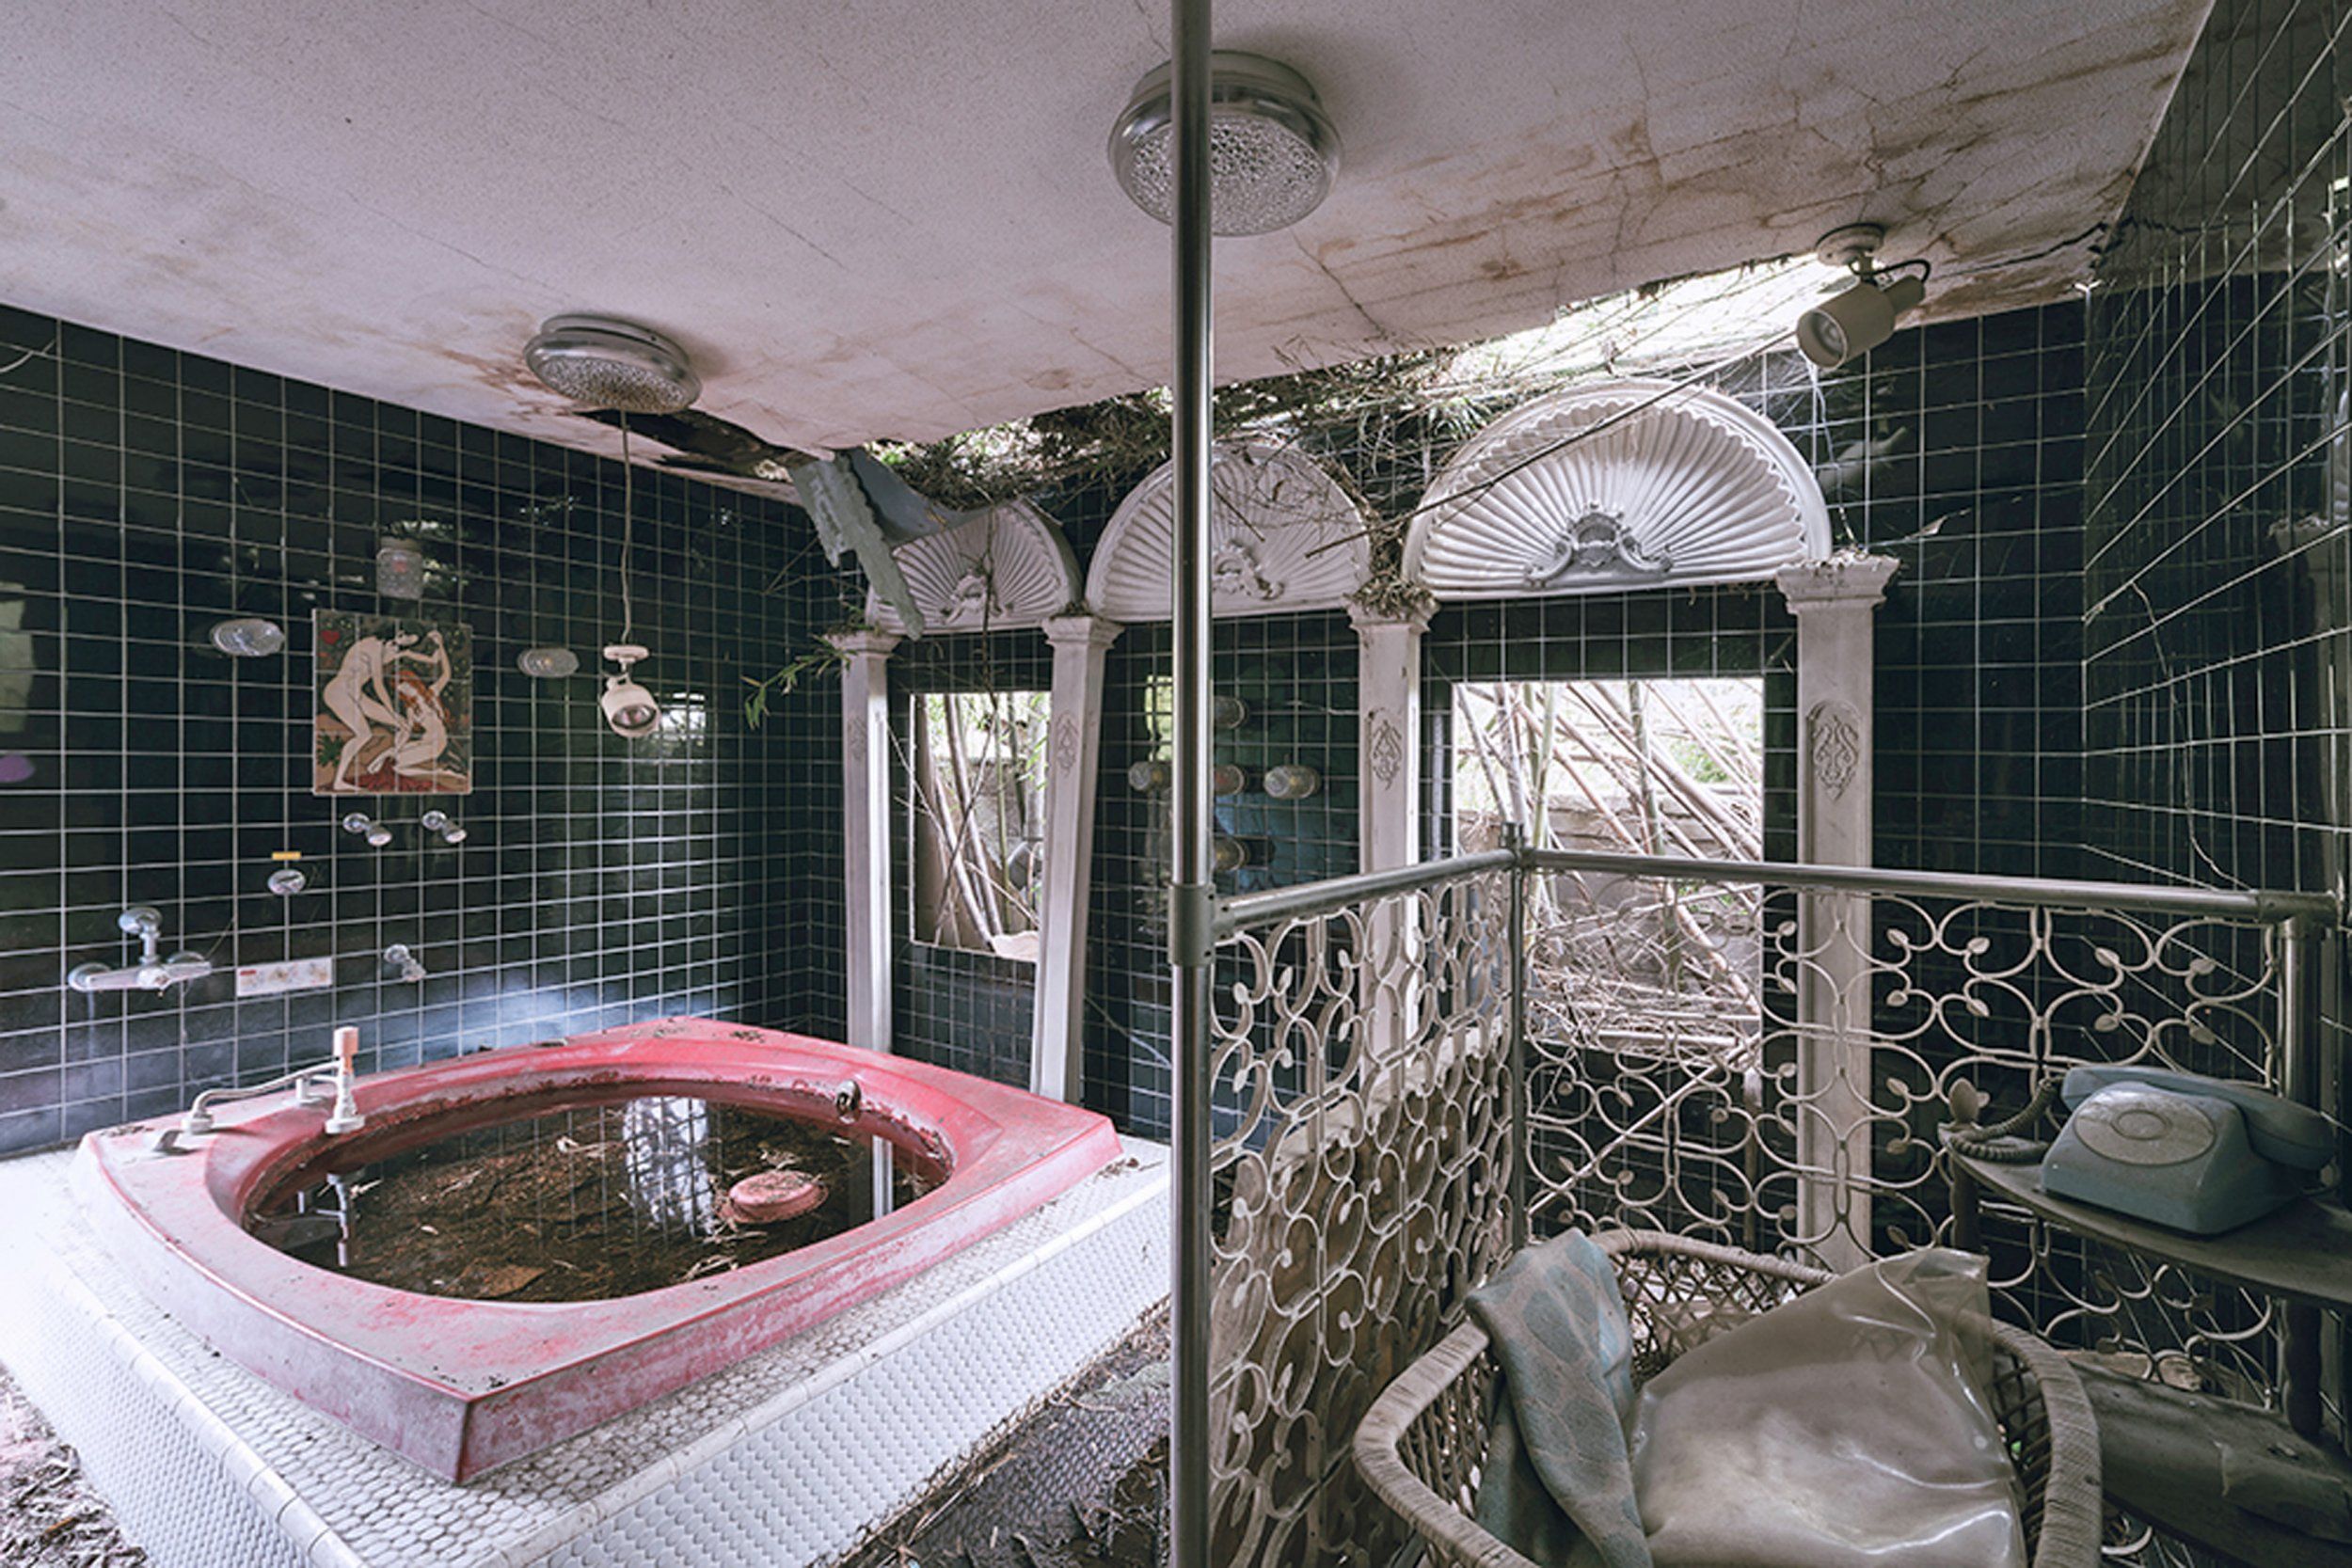 All the suites include a dining room and a bathroom. Pictured, mould grows in a fading pink hot tub filled with muddy brown water. The room has started to be invaded by nature as tree branches push through the ceiling and the two windows.